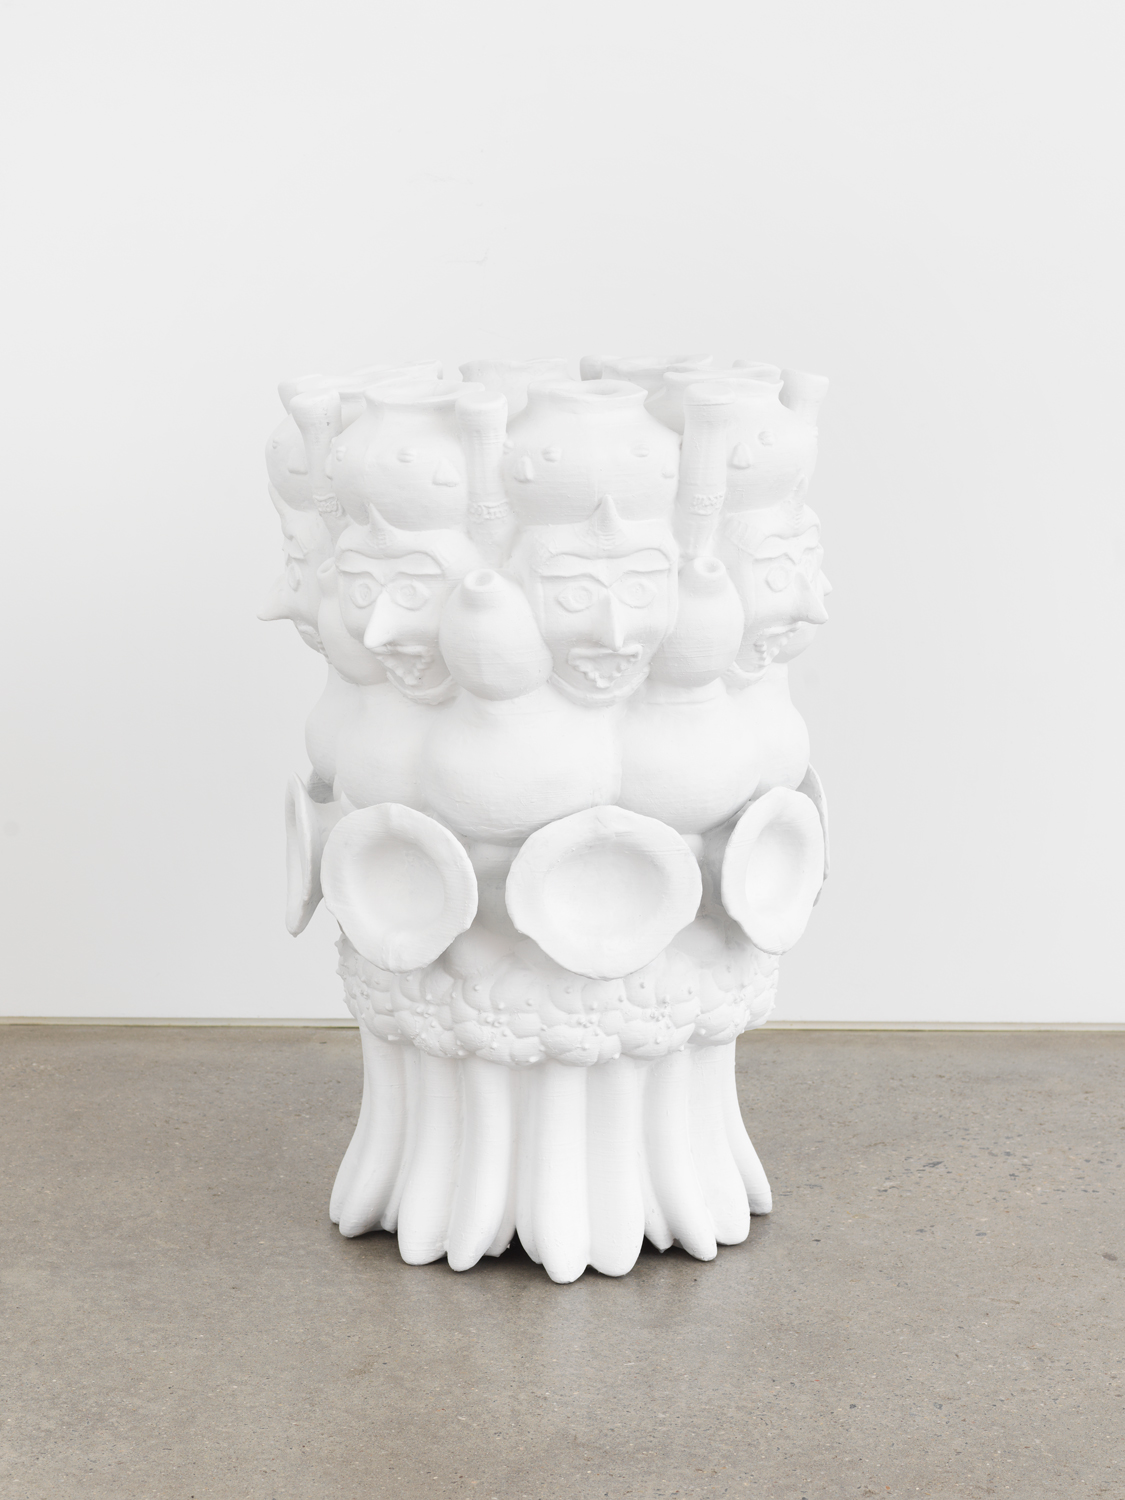 André Filipek-Magaña, Caracetacocacola Pelocalabazapeyothurro, 2019, Chalk paint on epoxy-finished thermoplastic, 35.47h x 25.70w x 24.56d in.